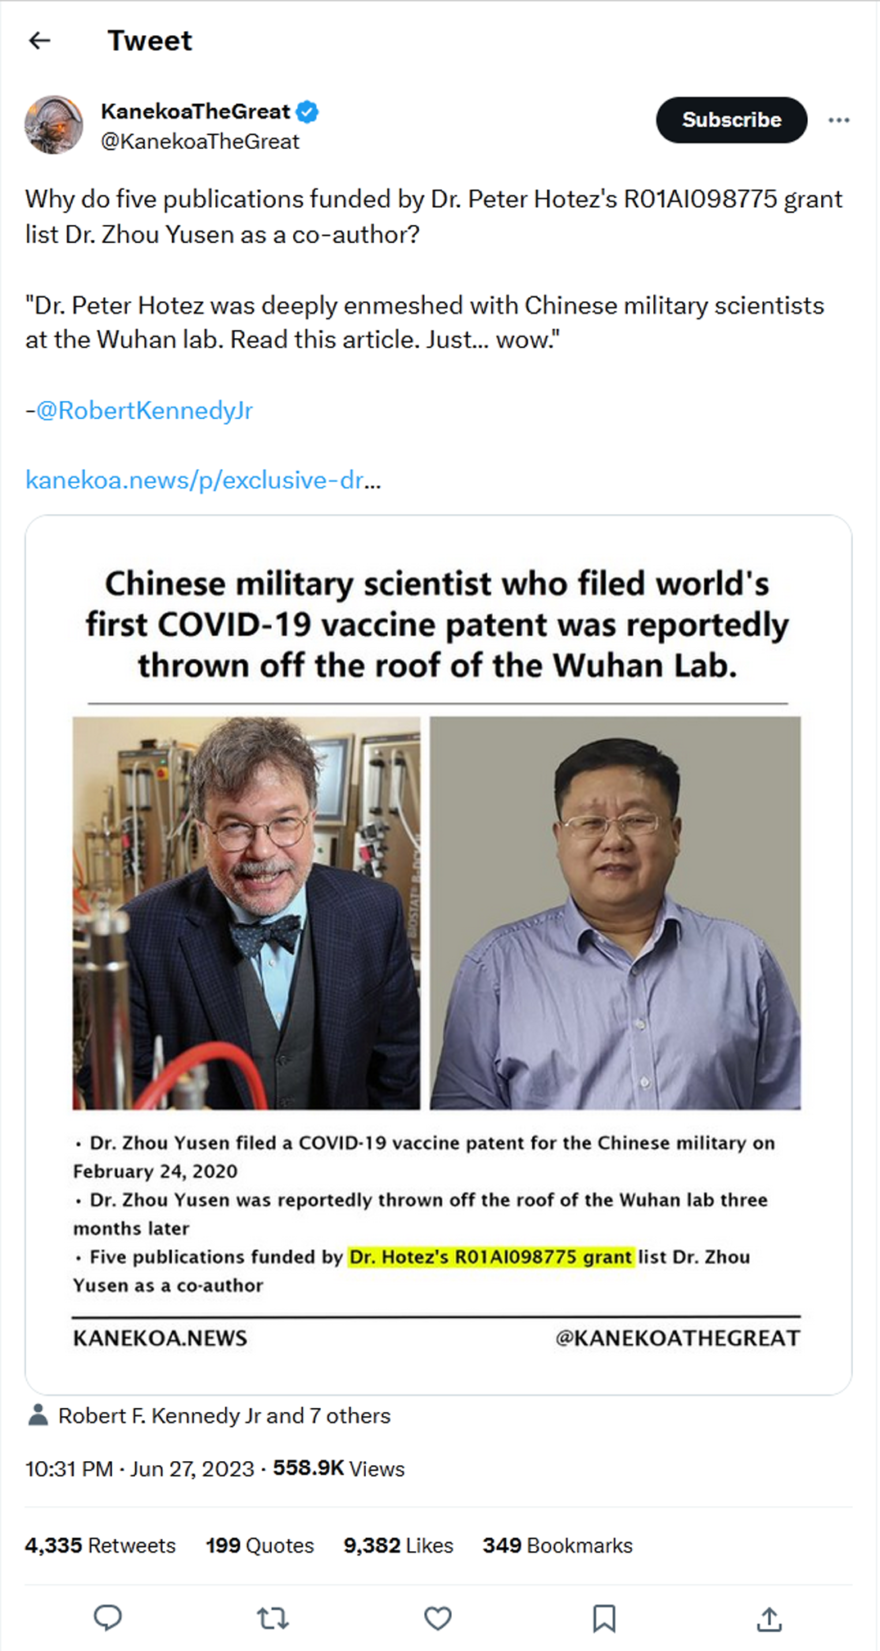 KanekoaTheGreat-tweet-27June2023-Why do five publications funded by Dr. Peter Hotez's R01AI098775 grant list Dr. Zhou Yusen as a co-author?